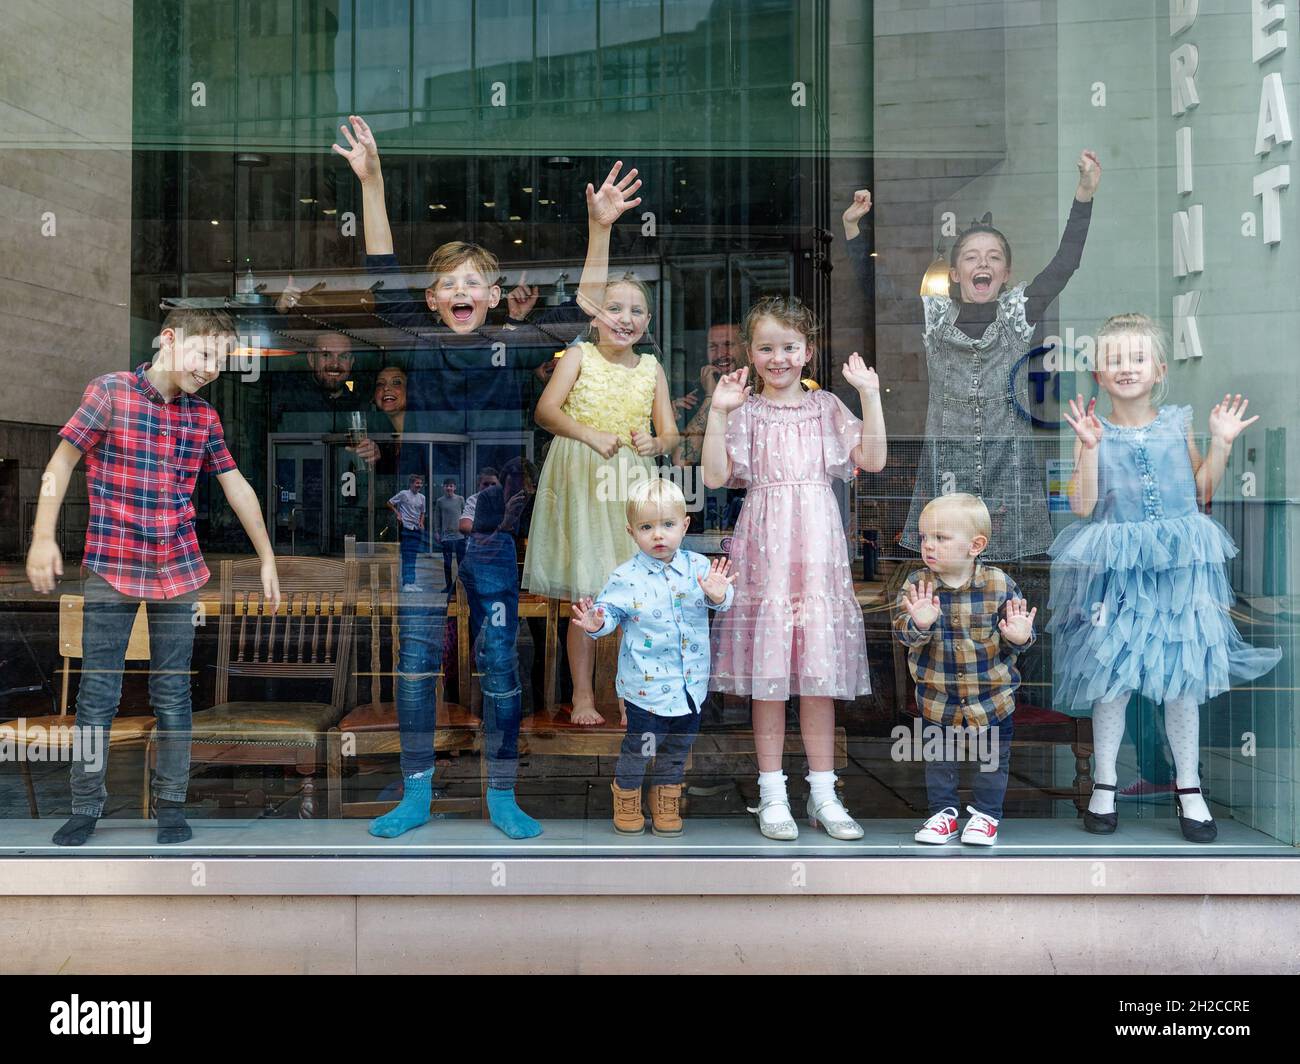 London, Greater London, England, October 09 2021: A group of children behind a window smile, wave and one does a robot dance Stock Photo